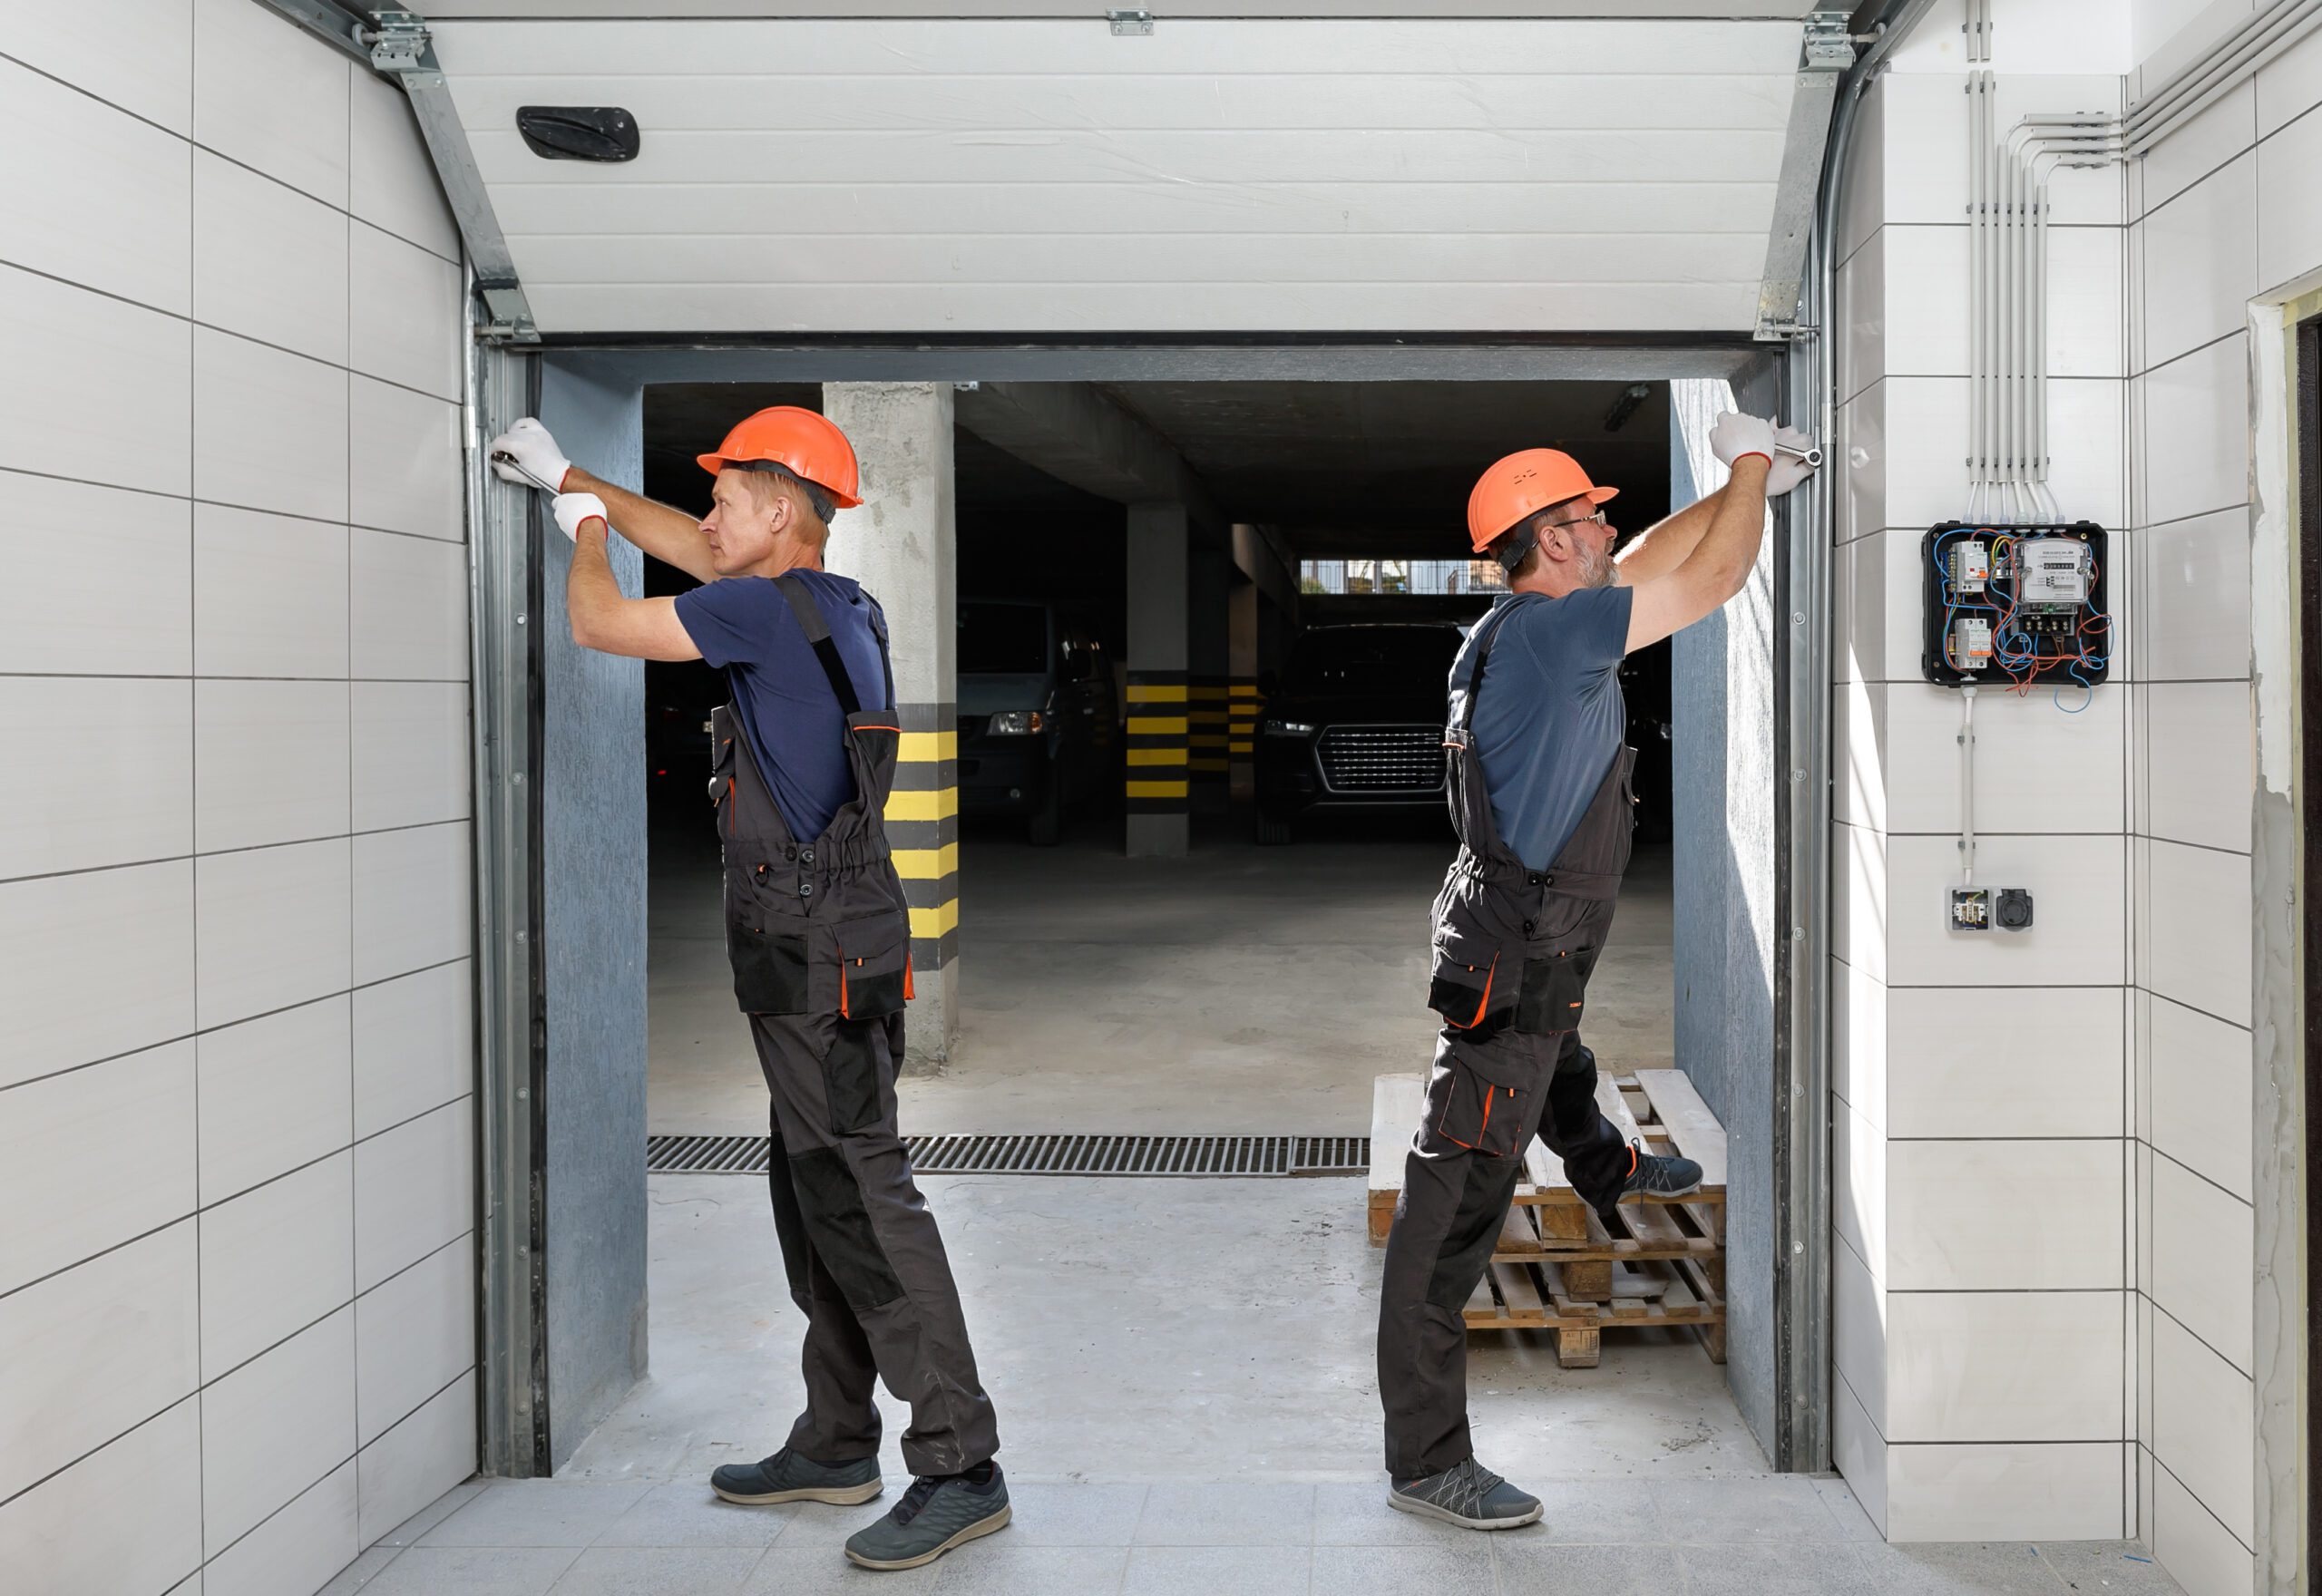 Workers from patrick sprack limited are installing lifting gates of the garage door as part of the preventive maintenance program